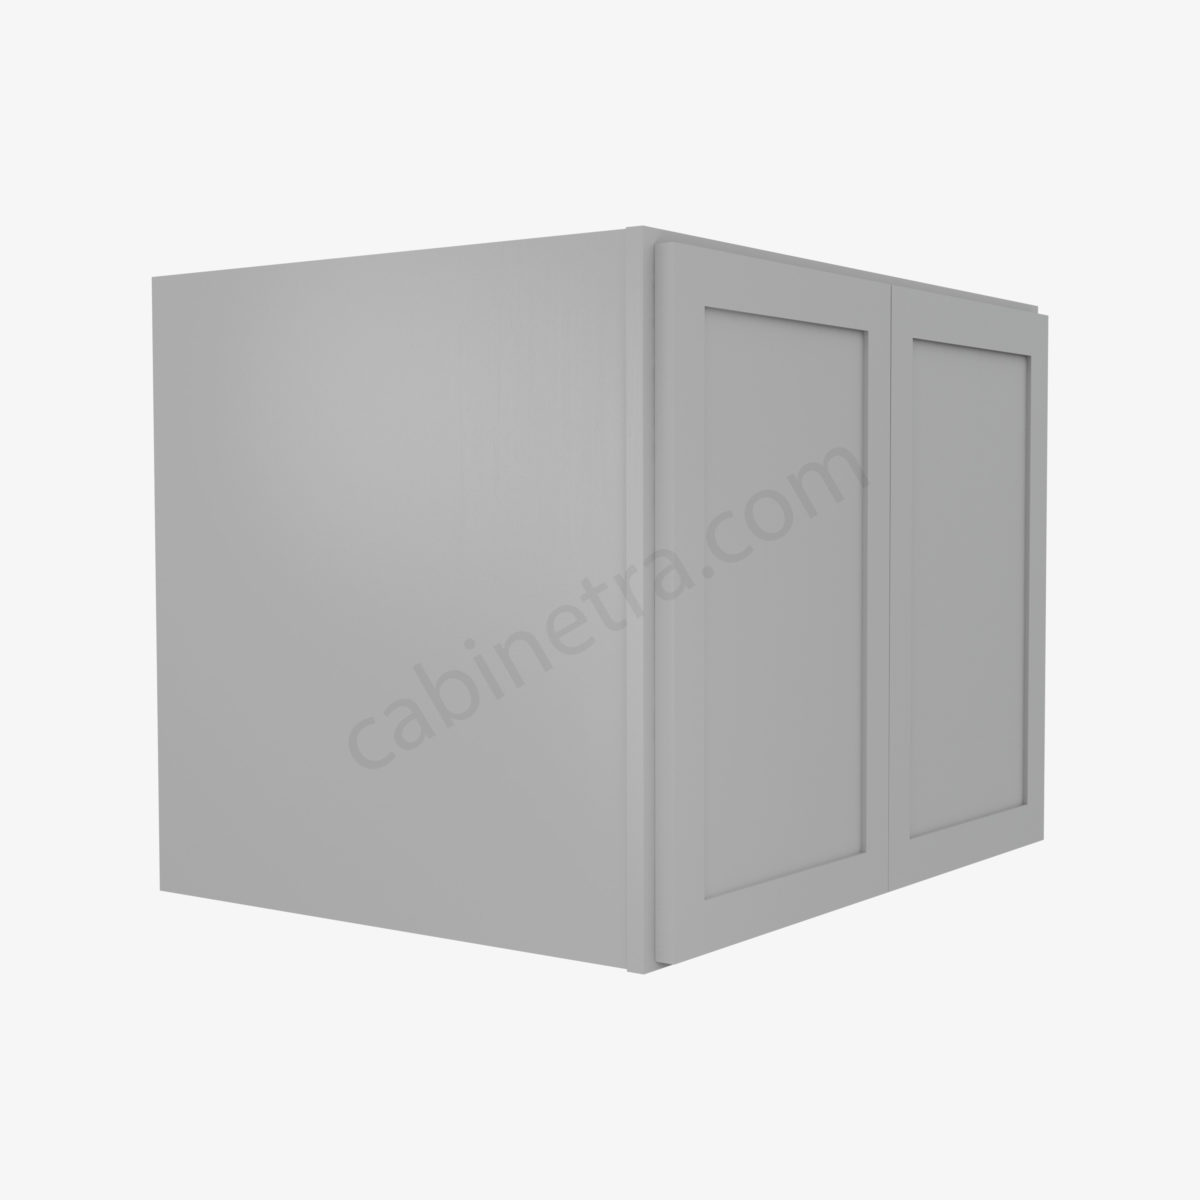 AB W302424B 4 Forevermark Lait Gray Shaker Cabinetra scaled